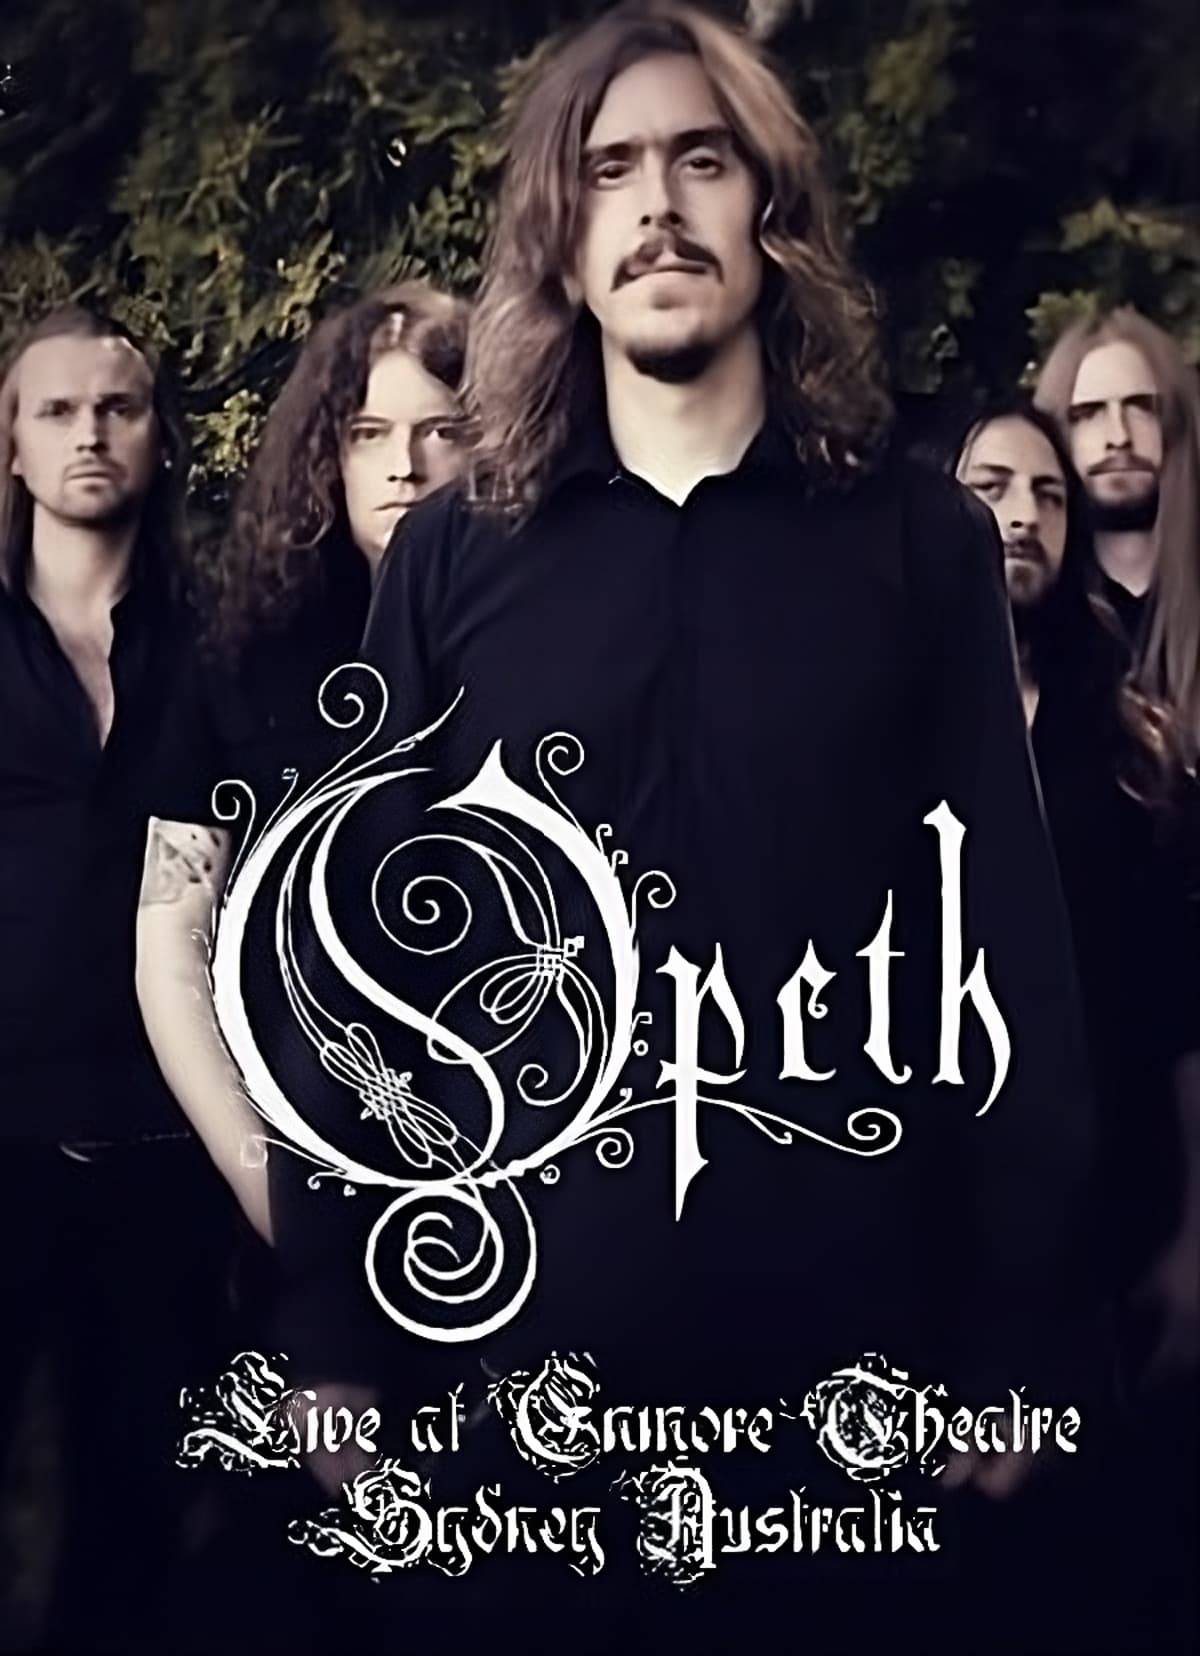 Opeth - Live in Sydney 2011